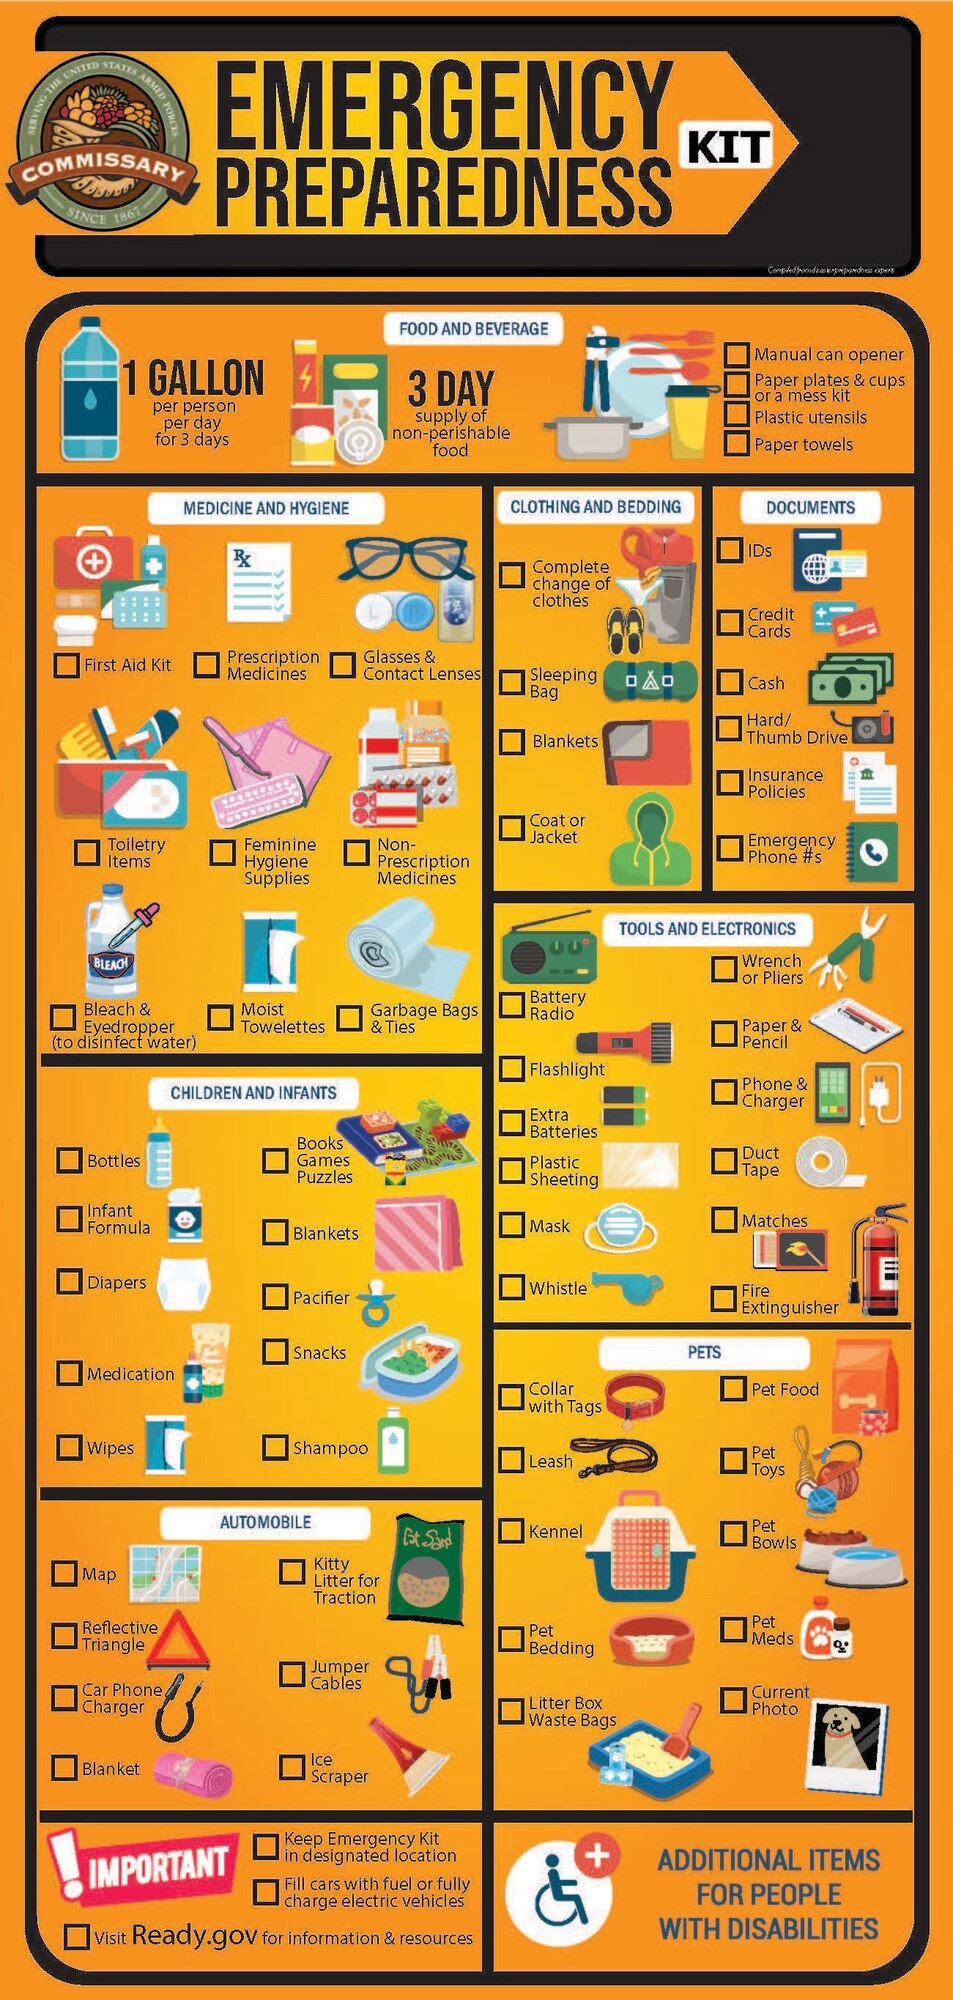 Service members and their families can plan for that disruption by using their commissary benefit to purchase emergency supplies. (DeCA infographic by Kathy Milley)